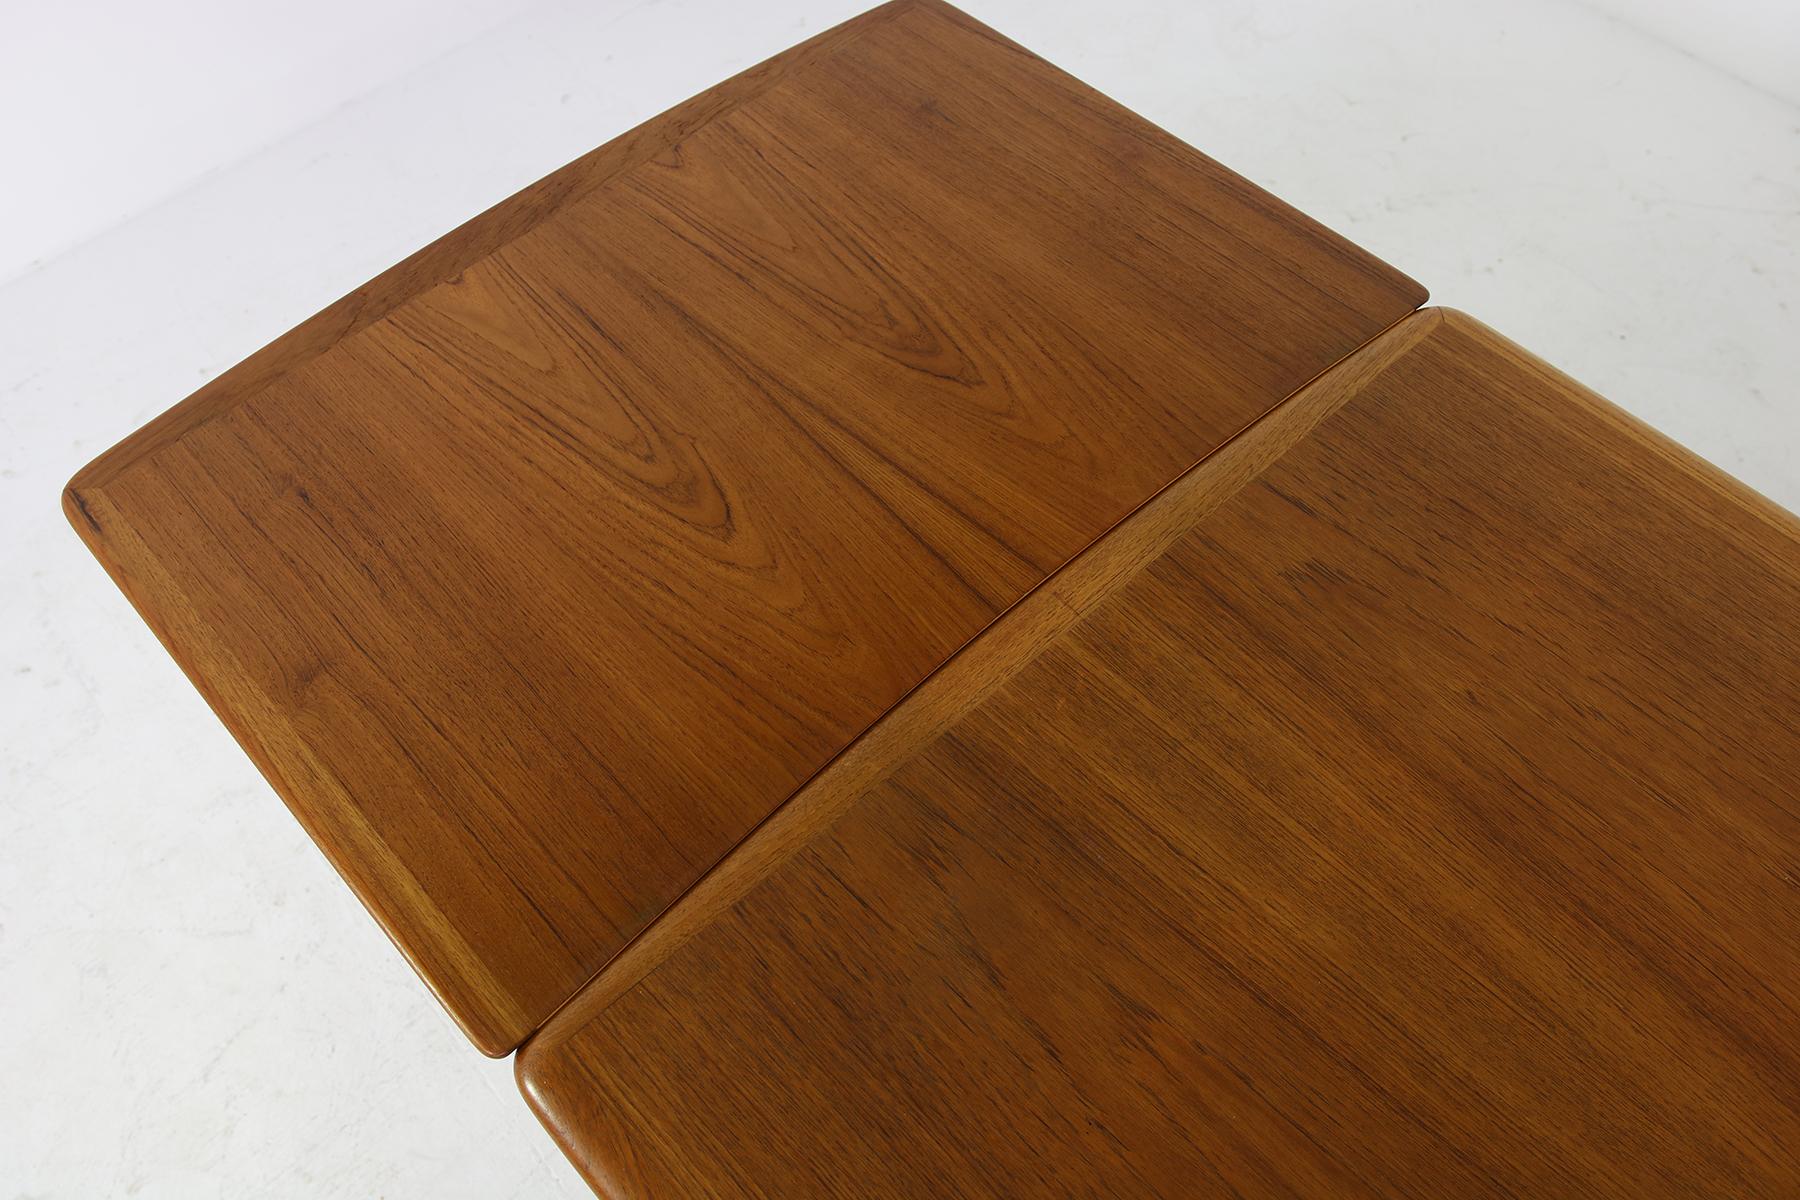 Large 1960s Extendable Teak Dining Table by Svend Aage Madsen, Danish Modern 1